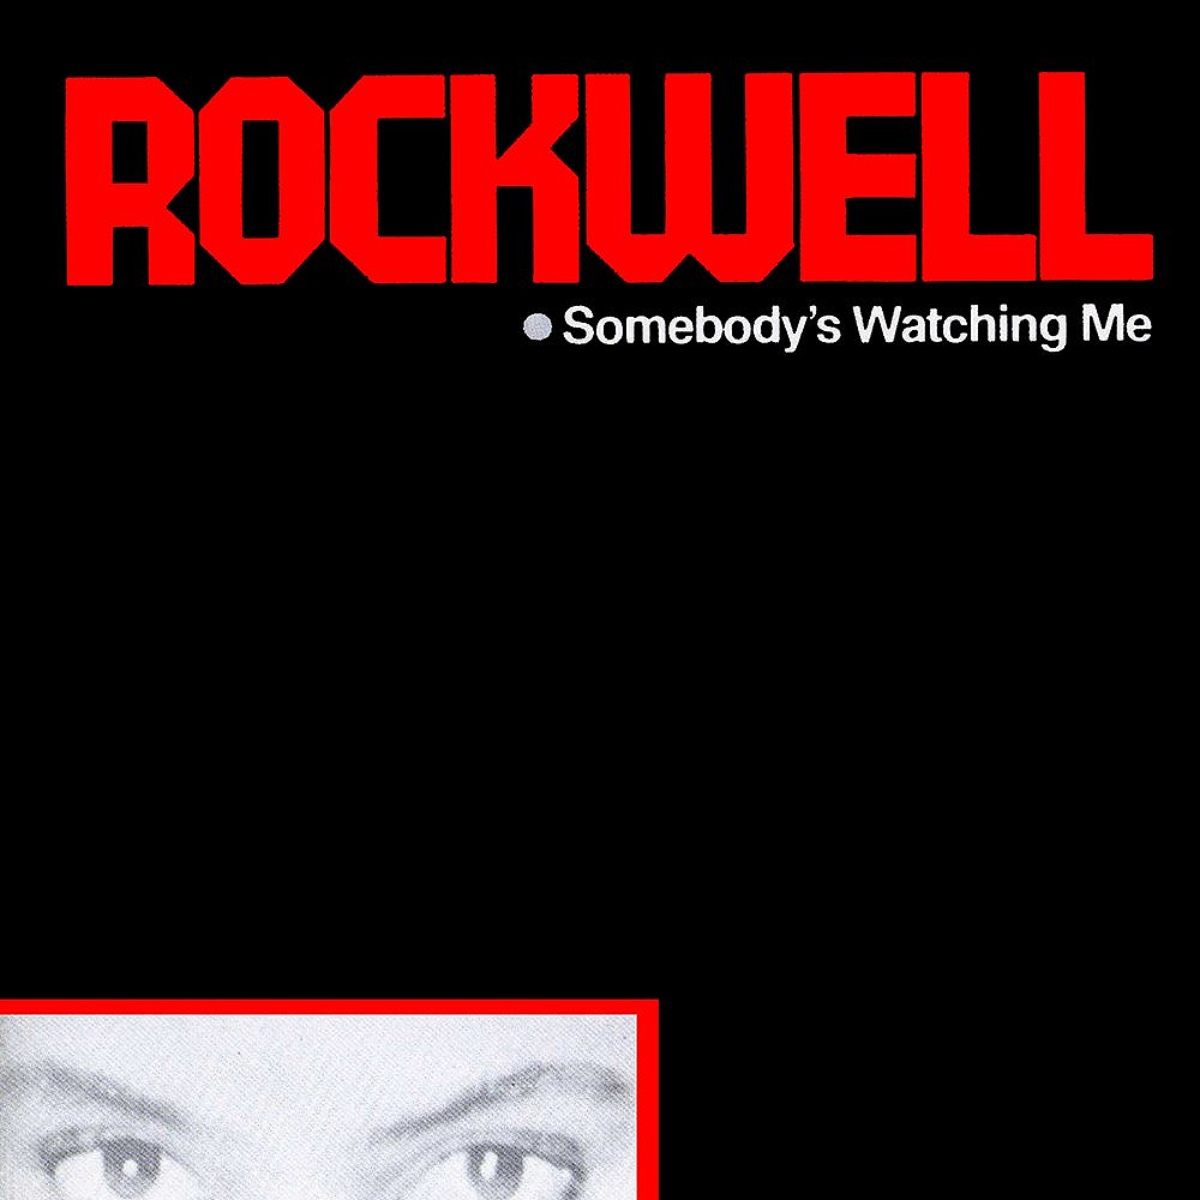 Somebody's Watching Me (1984) - Rockwell - Portada del single